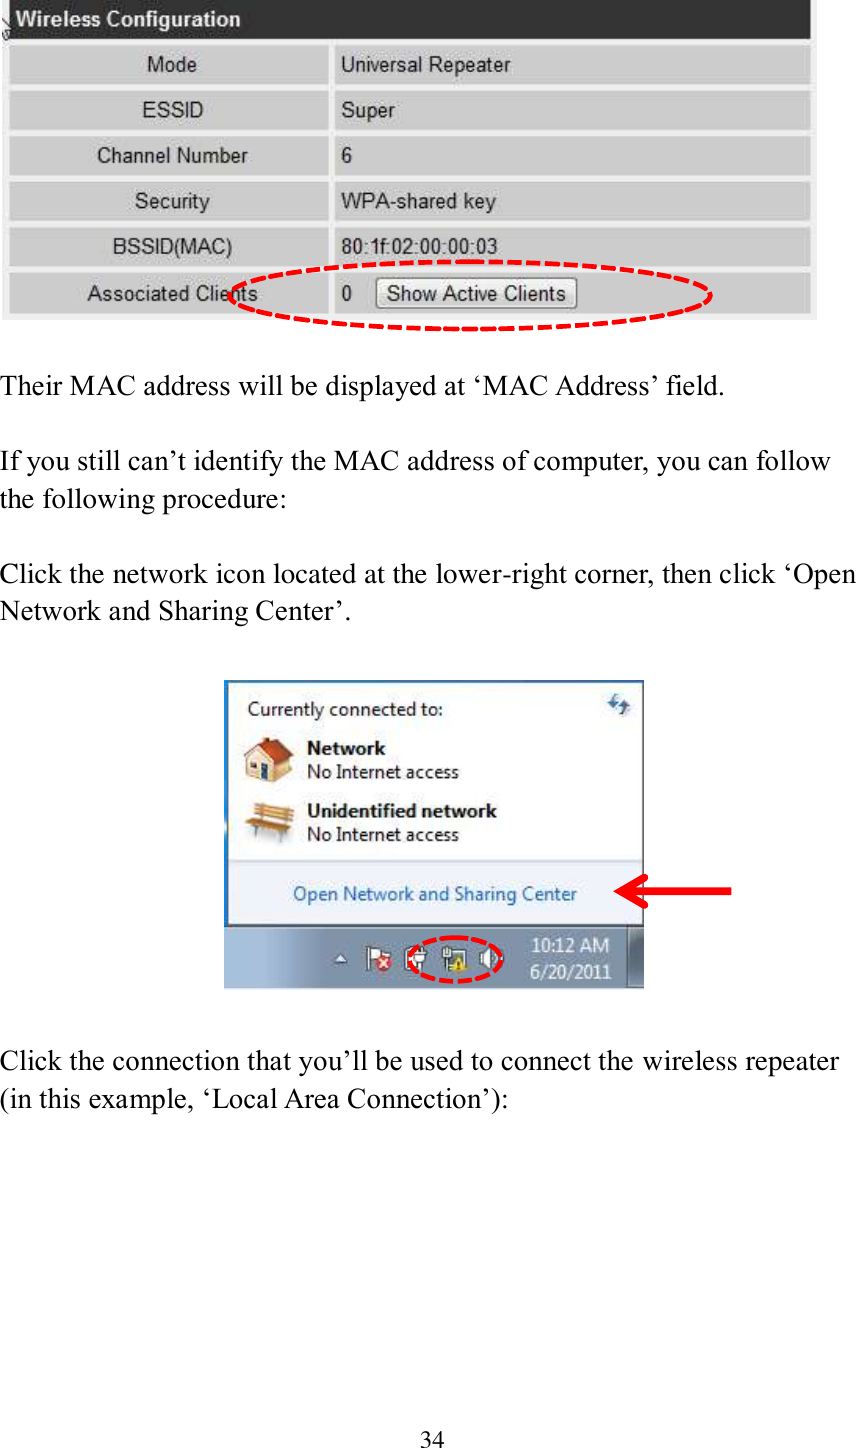 34    Their MAC address will be displayed at ‘MAC Address’ field.  If you still can’t identify the MAC address of computer, you can follow the following procedure:  Click the network icon located at the lower-right corner, then click ‘Open Network and Sharing Center’.    Click the connection that you’ll be used to connect the wireless repeater (in this example, ‘Local Area Connection’):  